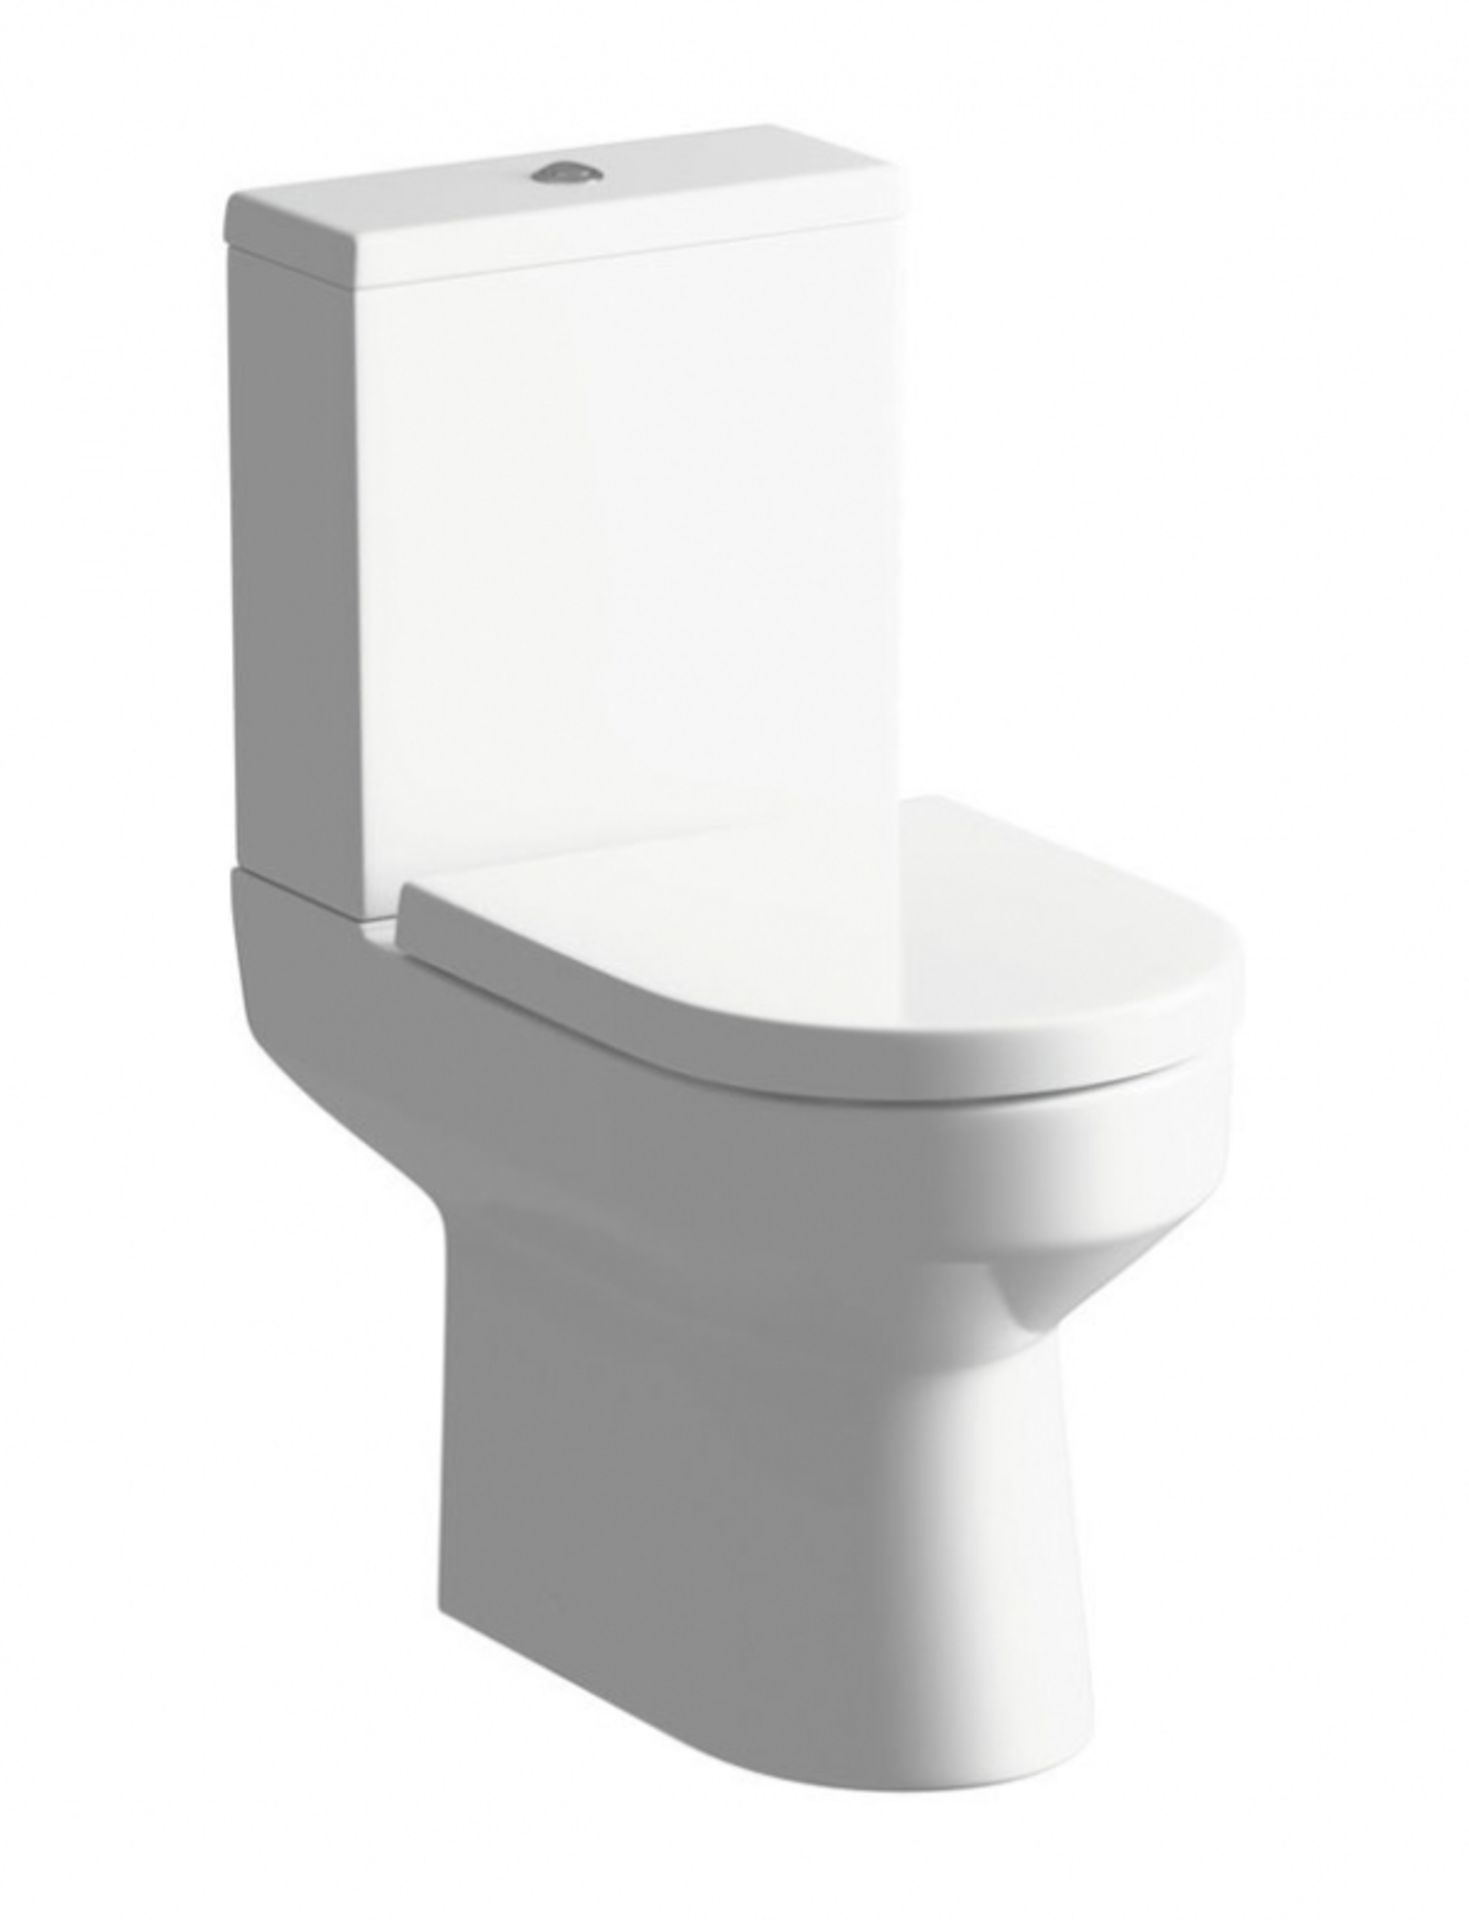 New & Boxed Lauruc Close Coupled Wc Inc Soft Close Toilet Seat. RRP £495.00.Close Coupled Wc - Image 2 of 2